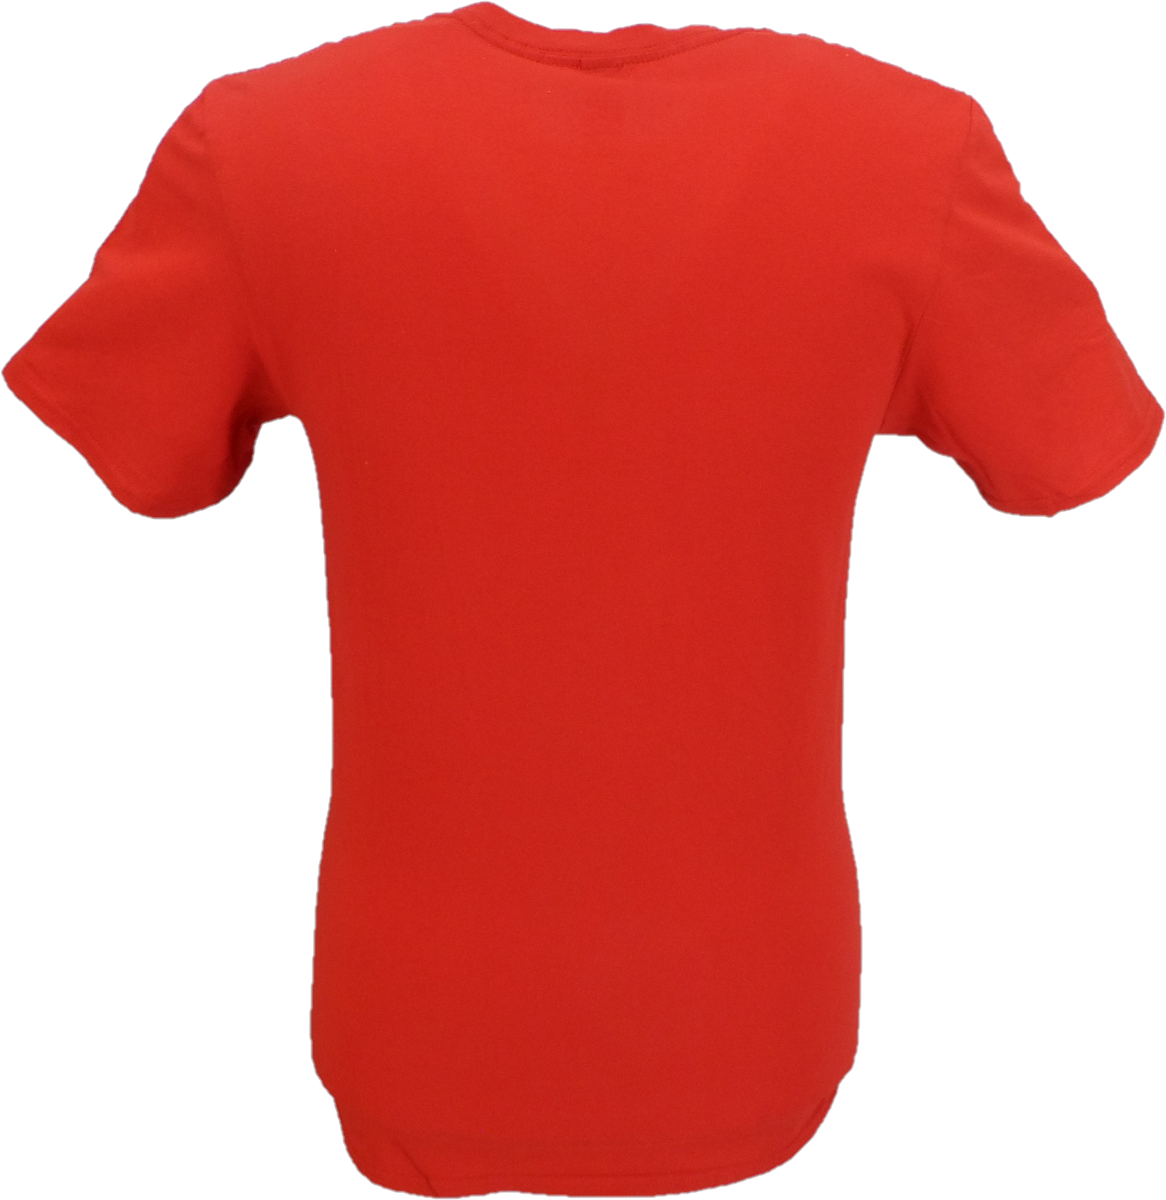 T-shirt fin avec logo rouge Lizzy pour homme Officially Licensed